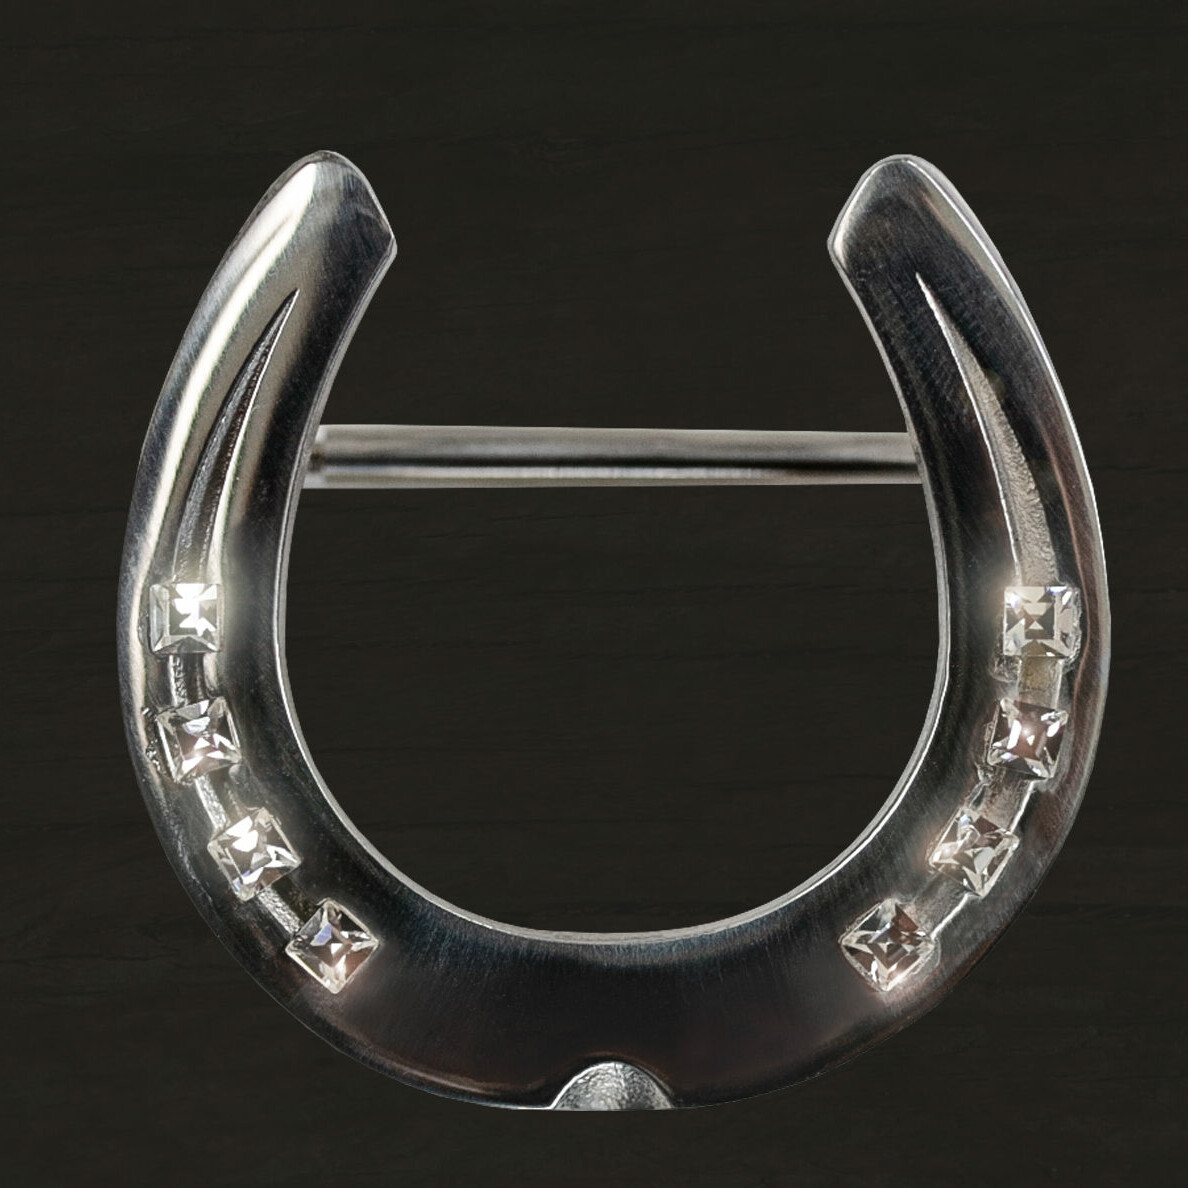 Jim Blurton Female Belt Buckle - visit the official Jim Blurton shop to buy online, horseshoes, farrier tools & accessories distributed worldwide.